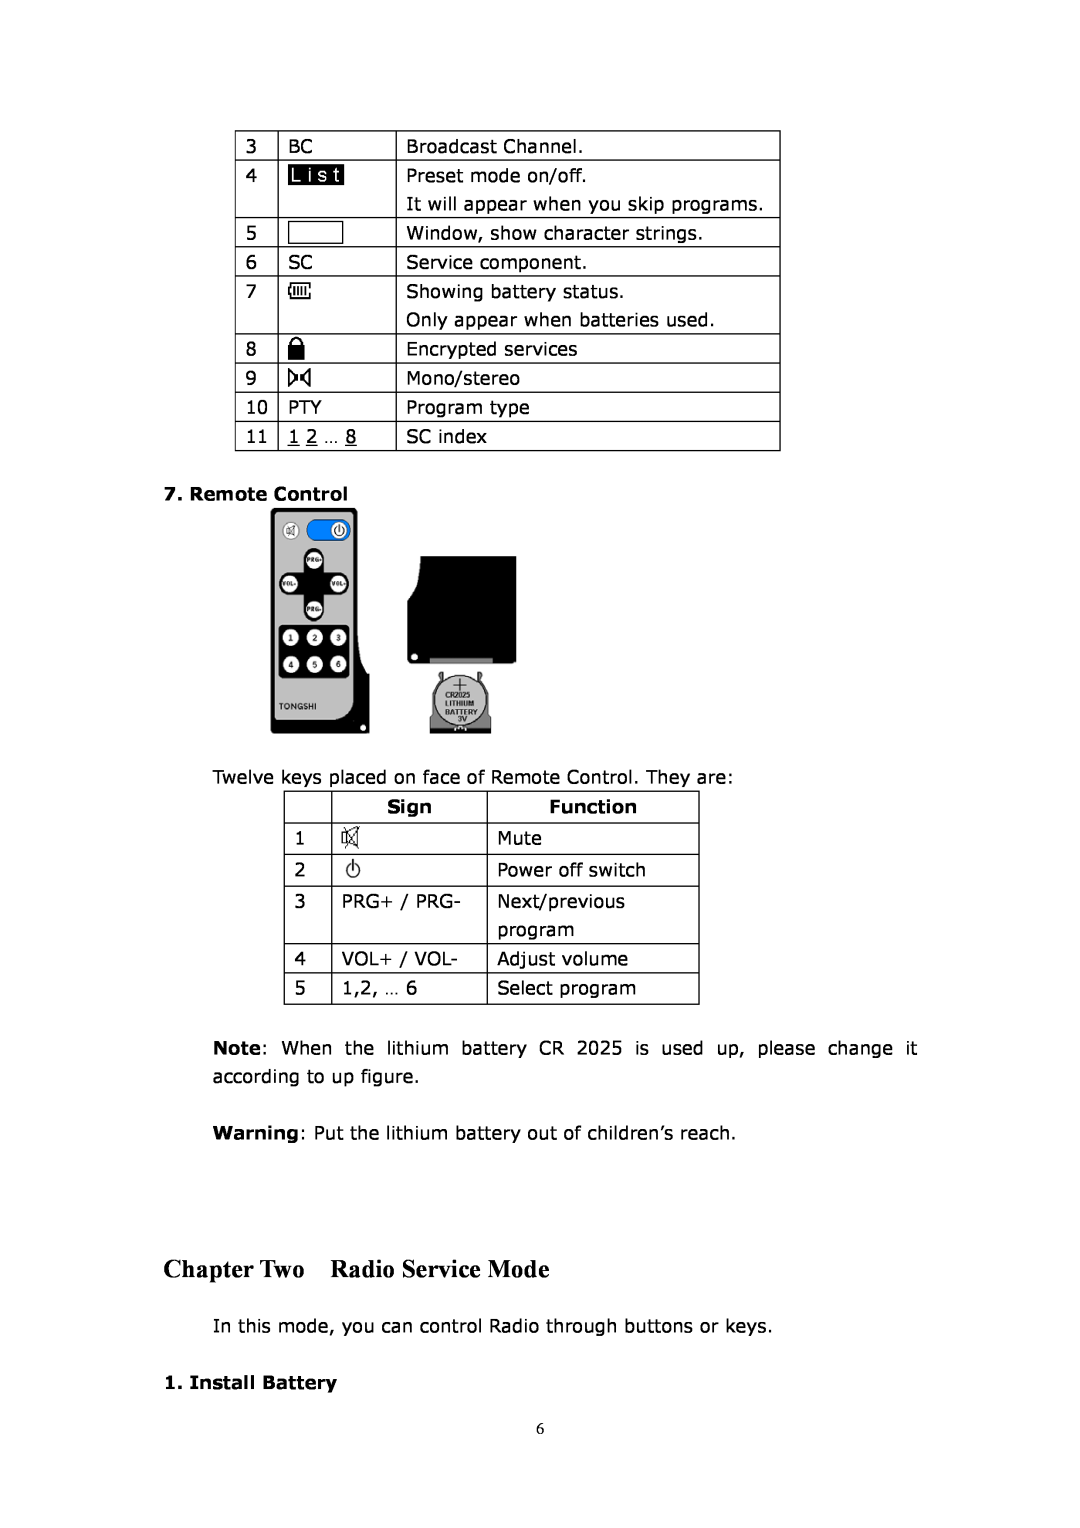 WorldSpace TONGSHI user manual Chapter Two Radio Service Mode, Remote Control, Sign, Function, Install Battery 